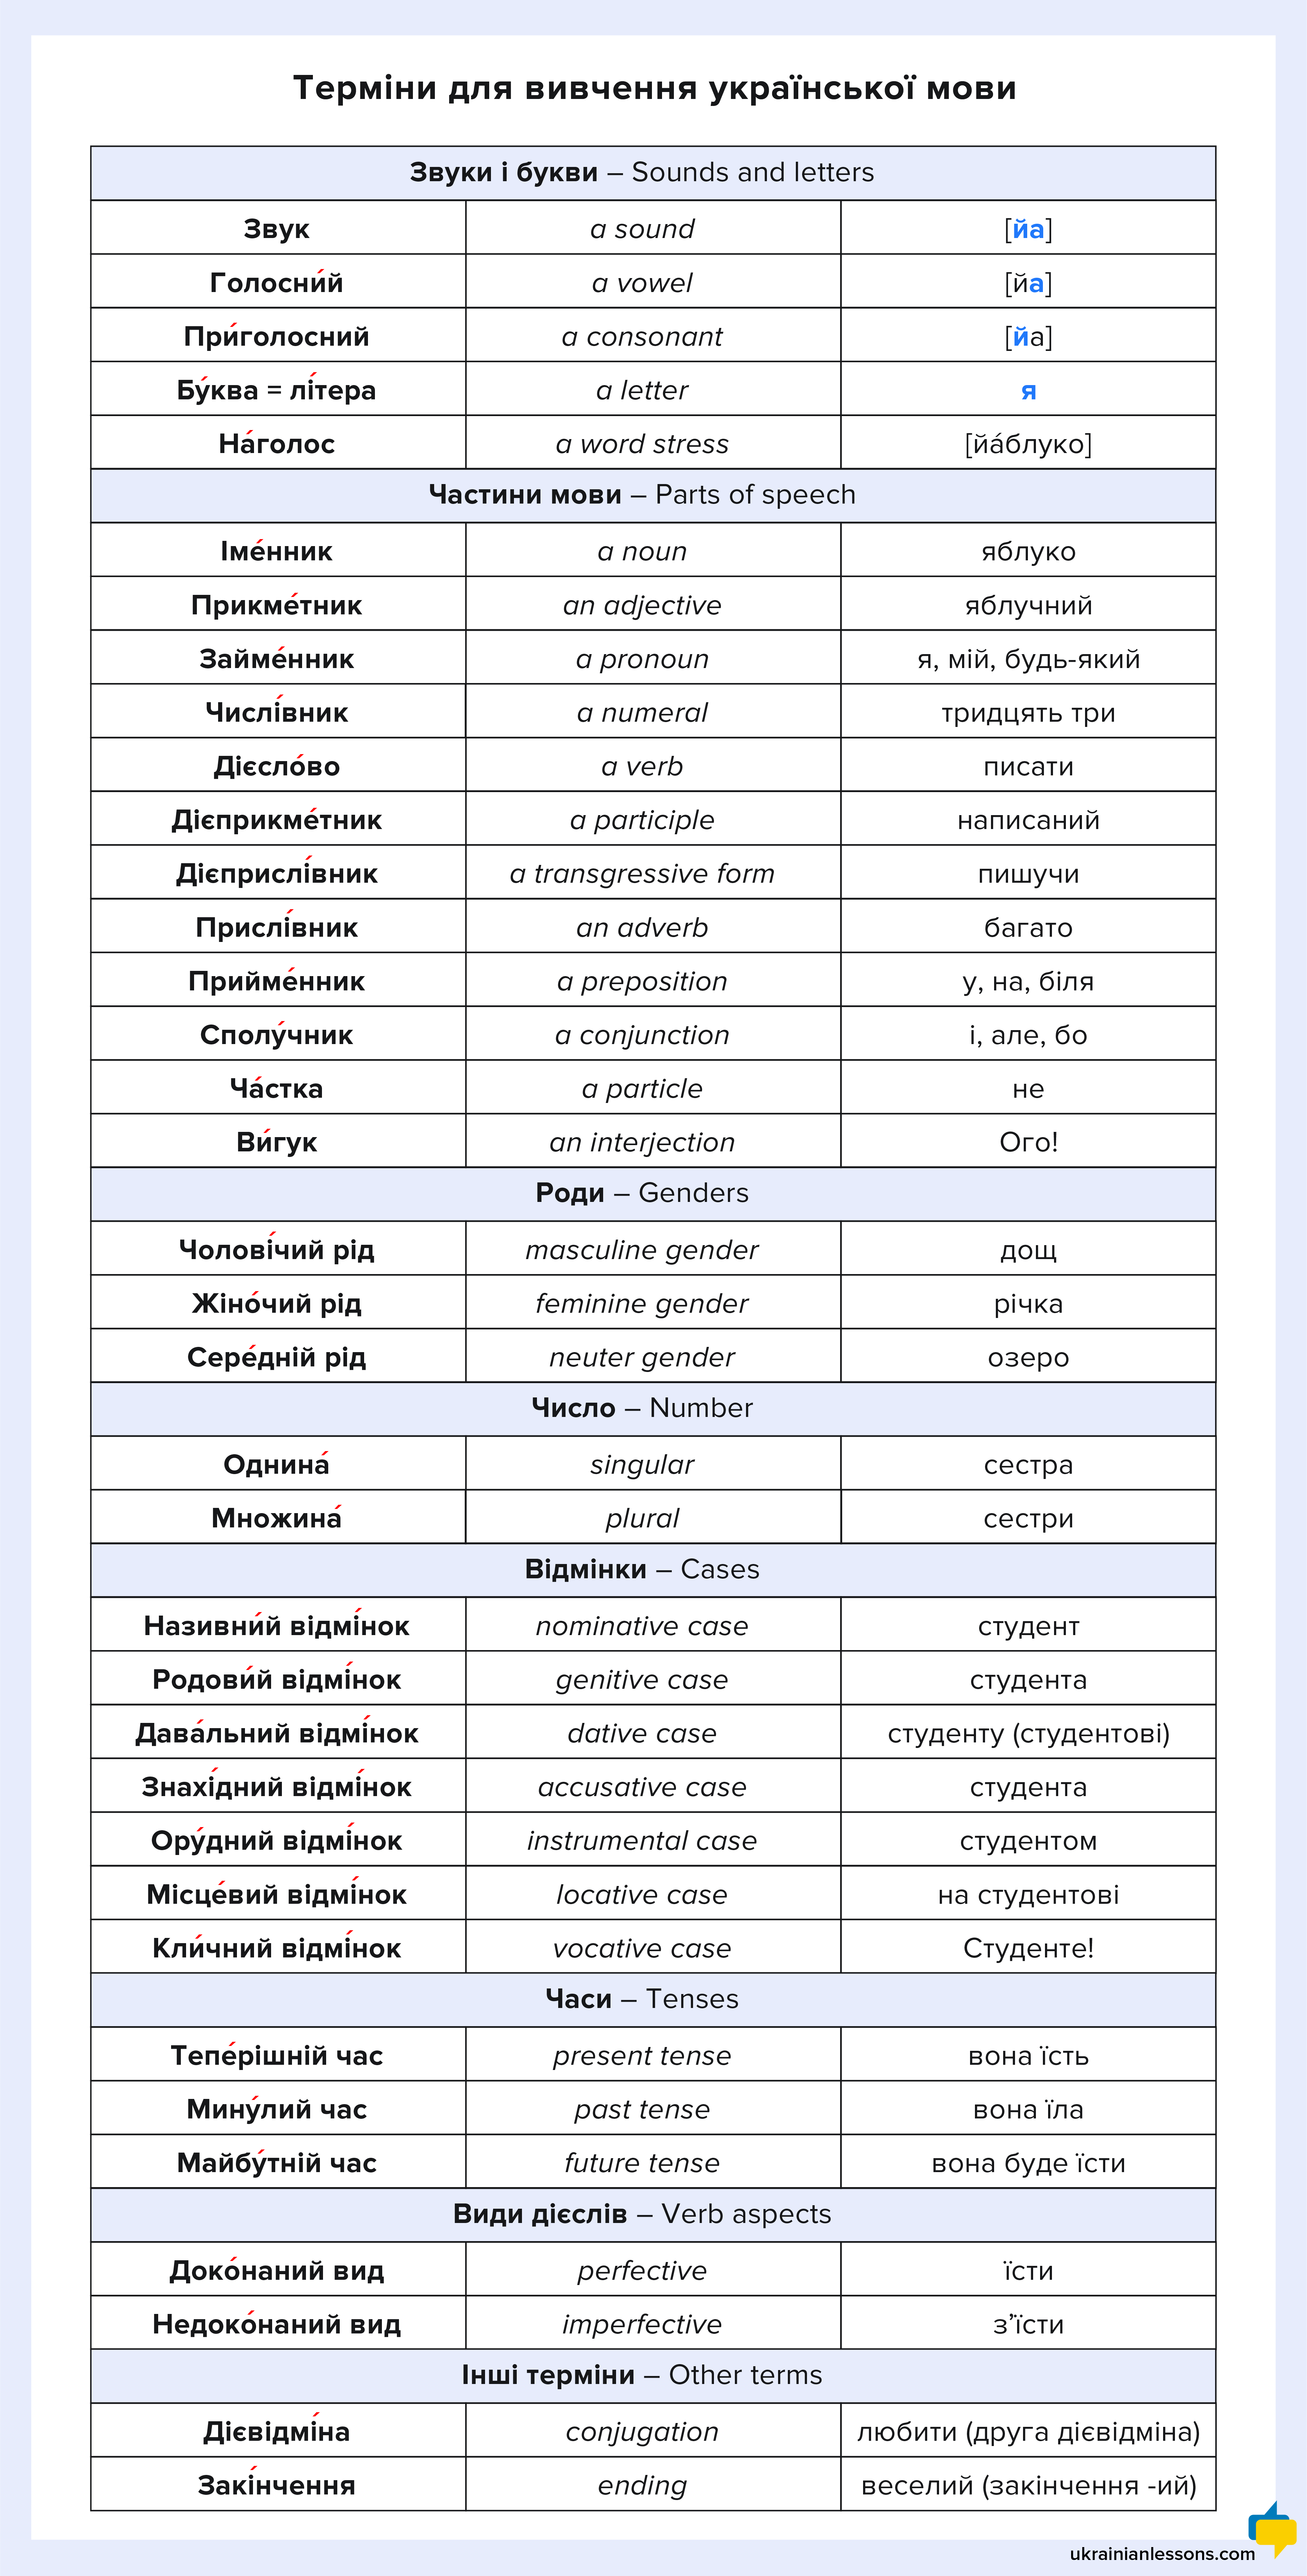 basic terms used in the study of Ukrainian